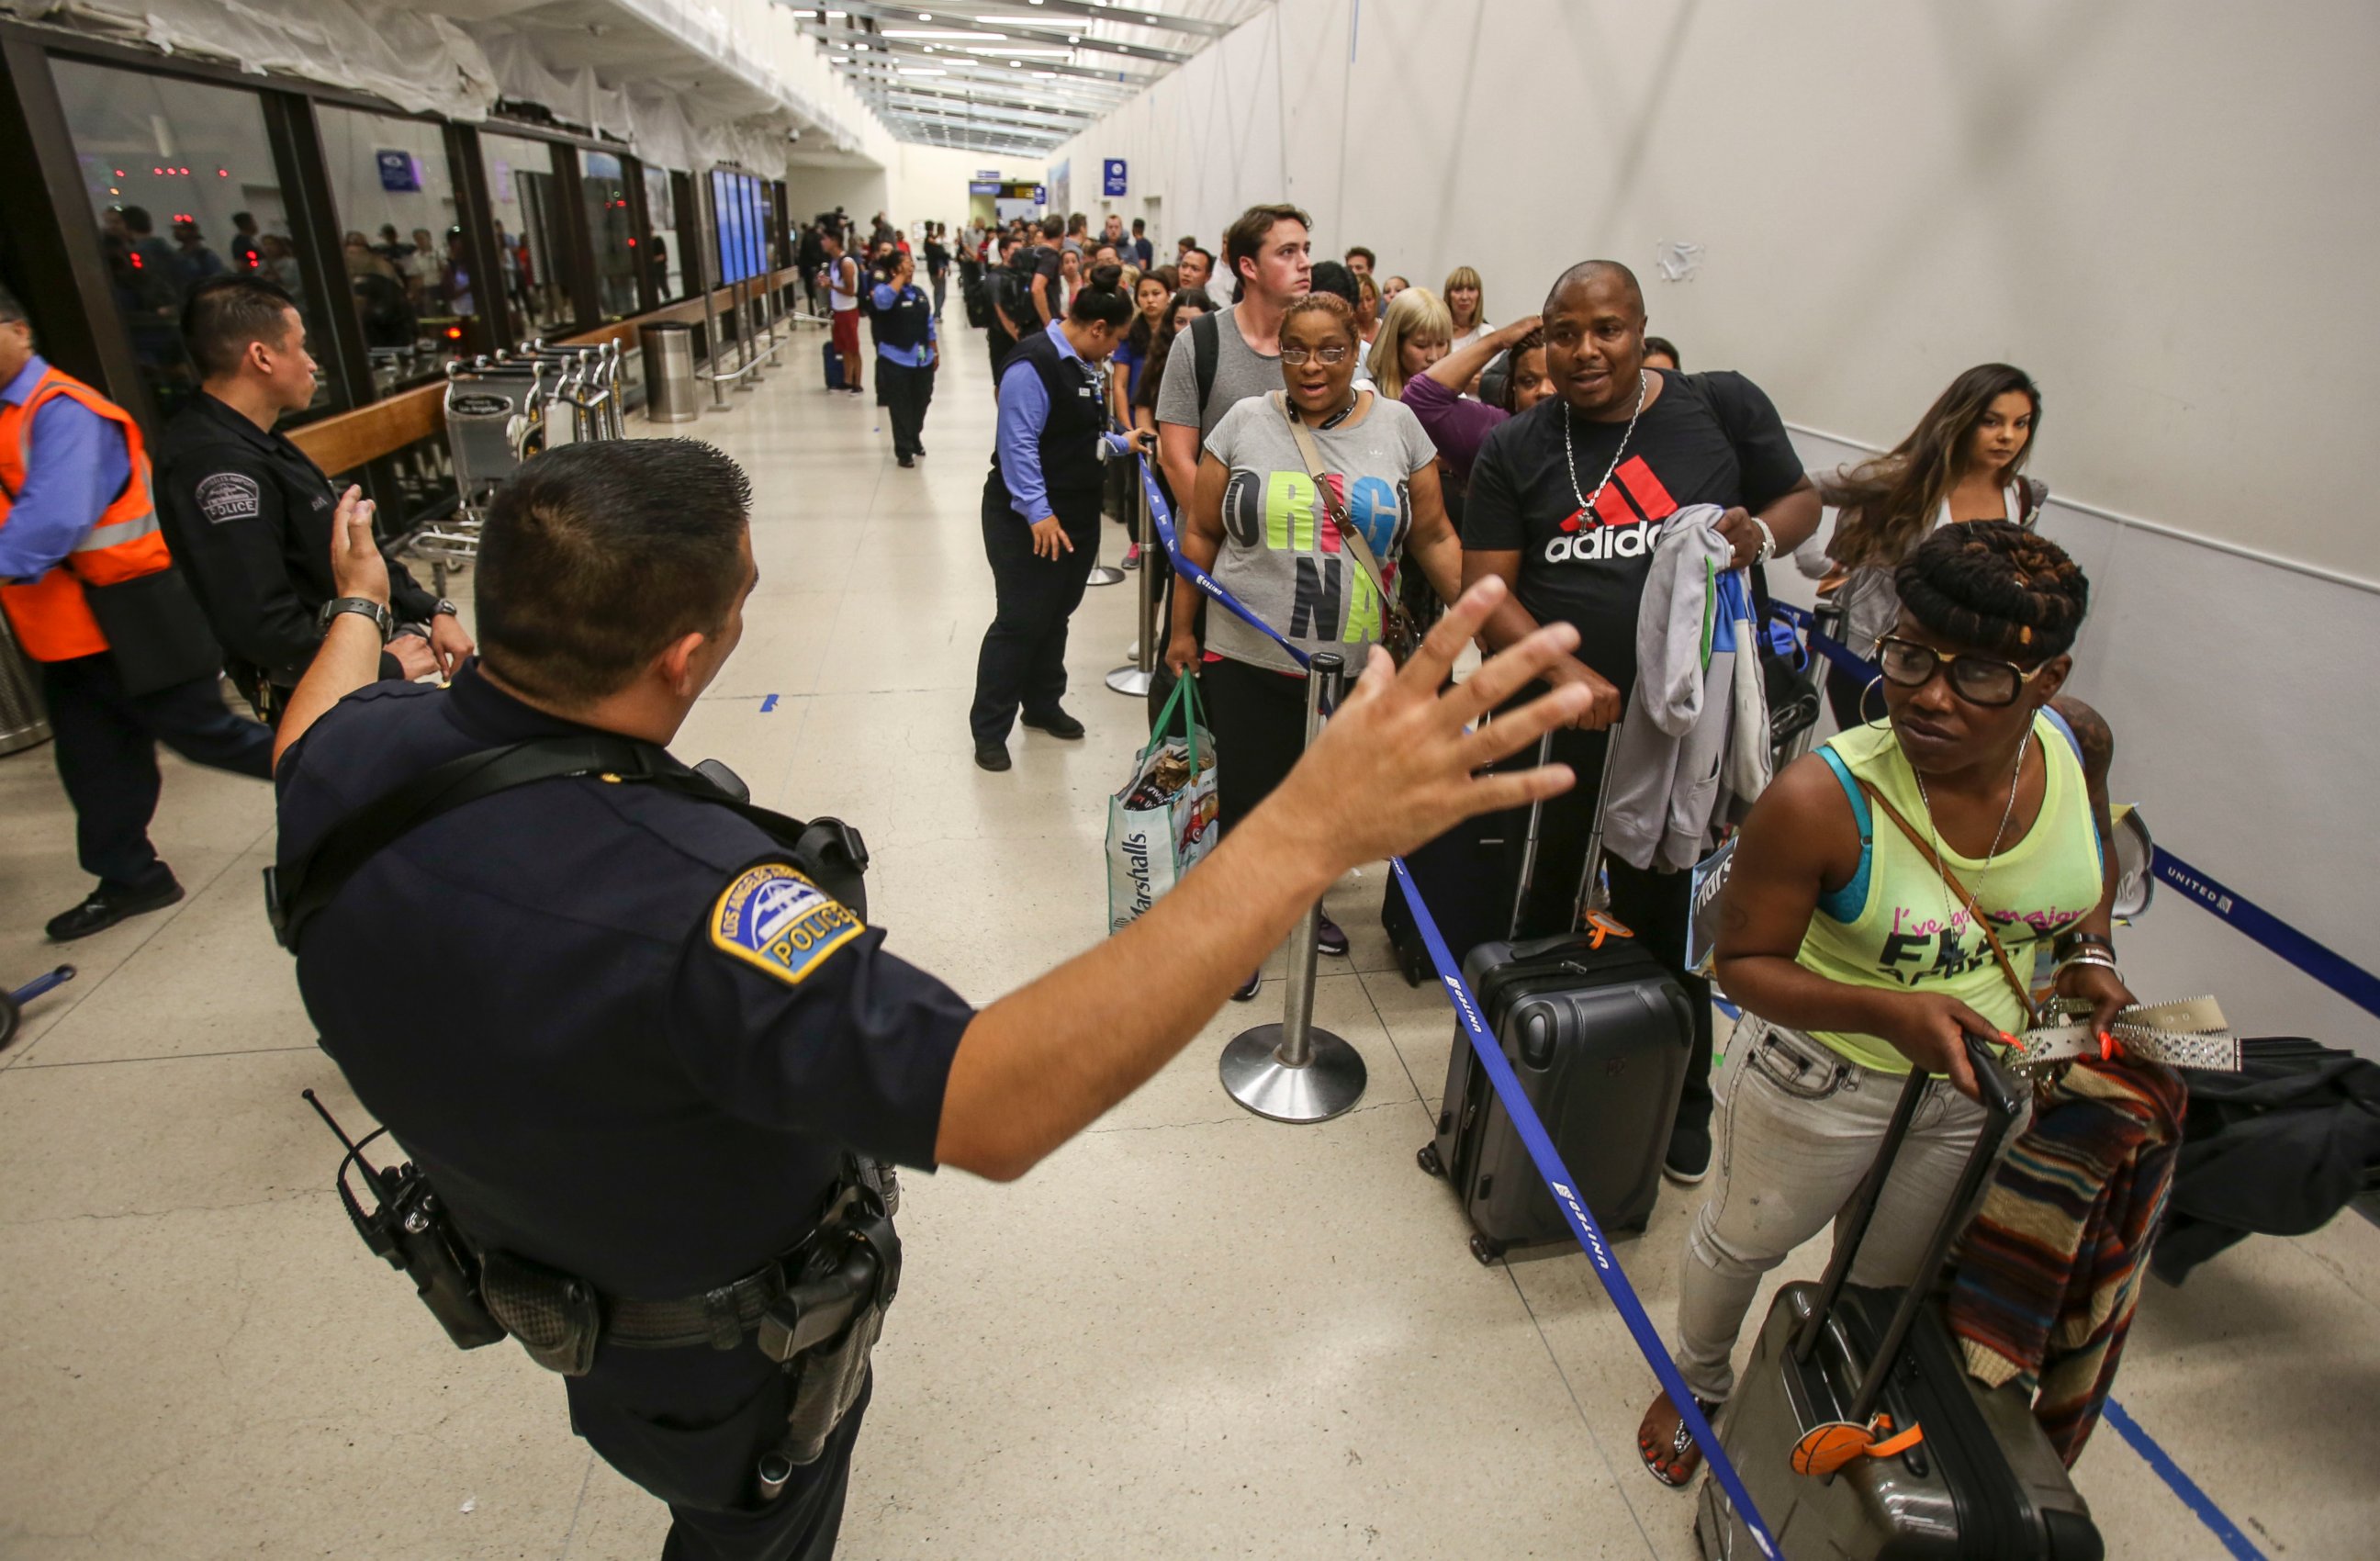 PHOTO: Police officers stand guard as passengers wait in line at Terminal 7 in Los Angeles International Airport, Sunday, Aug. 28, 2016.